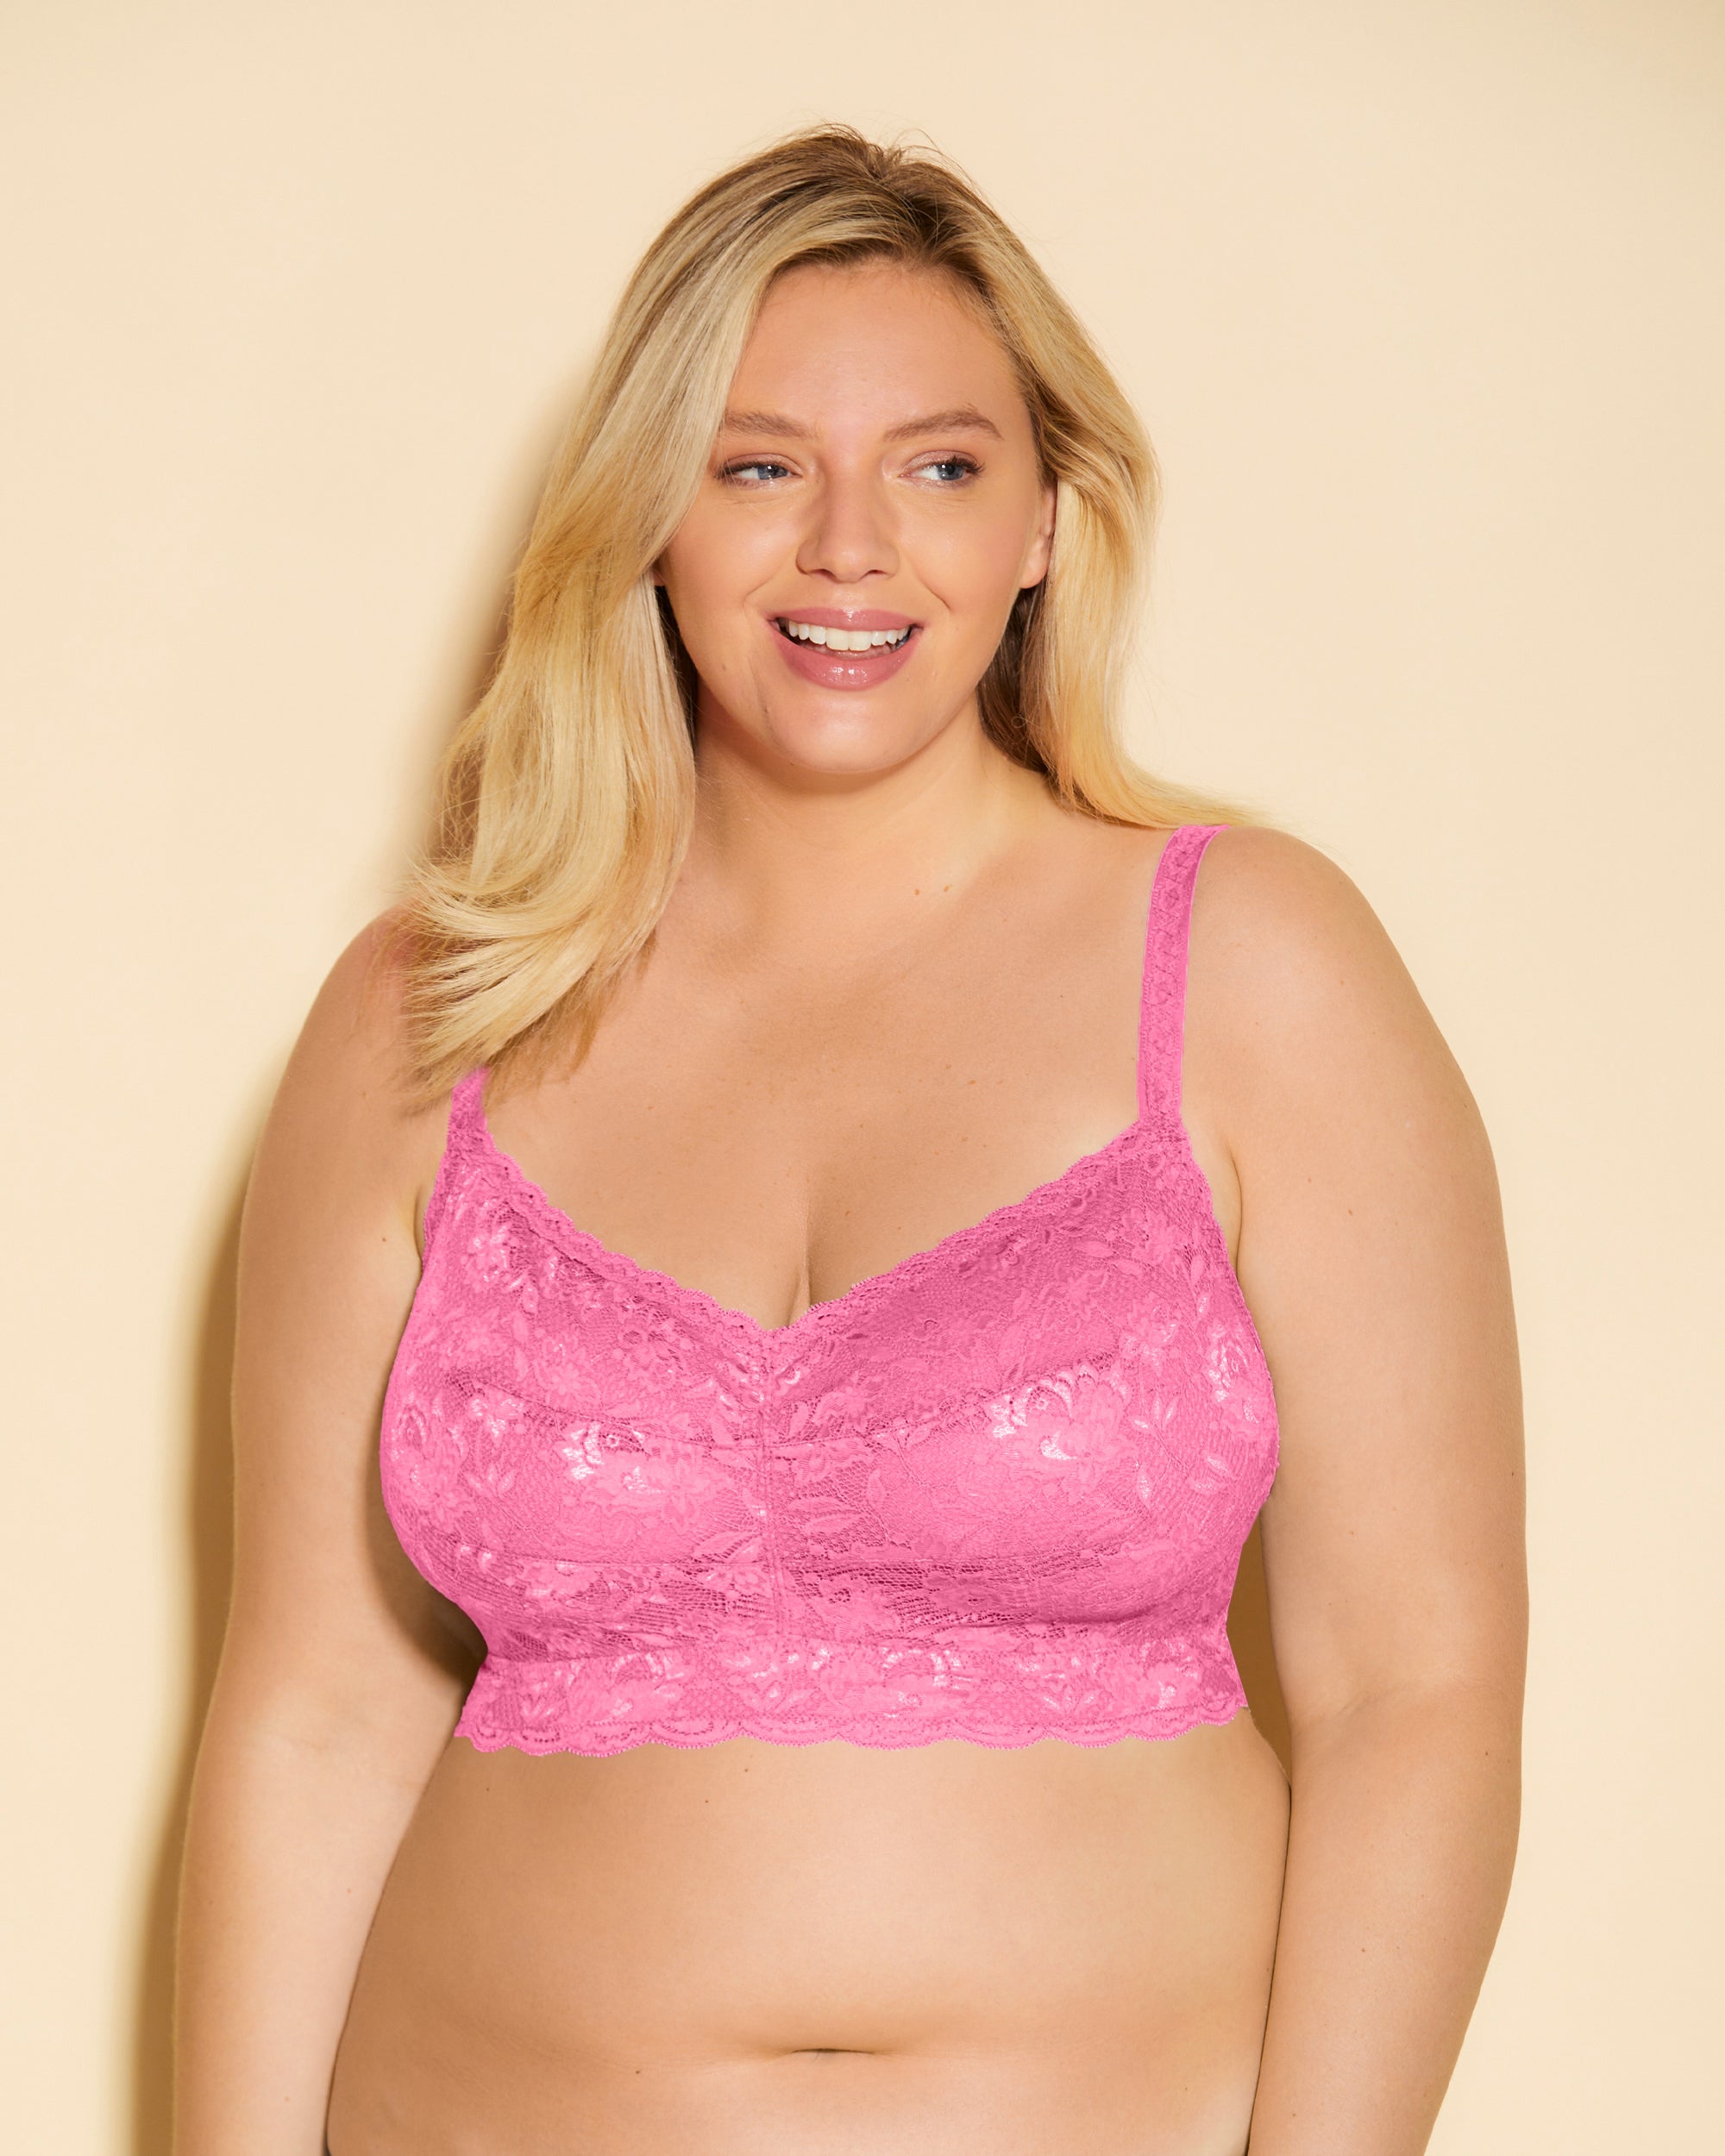 Cosabella Womens Never Say Never Ultra Curvy Sweetie Bralette Style- NEVER1321 